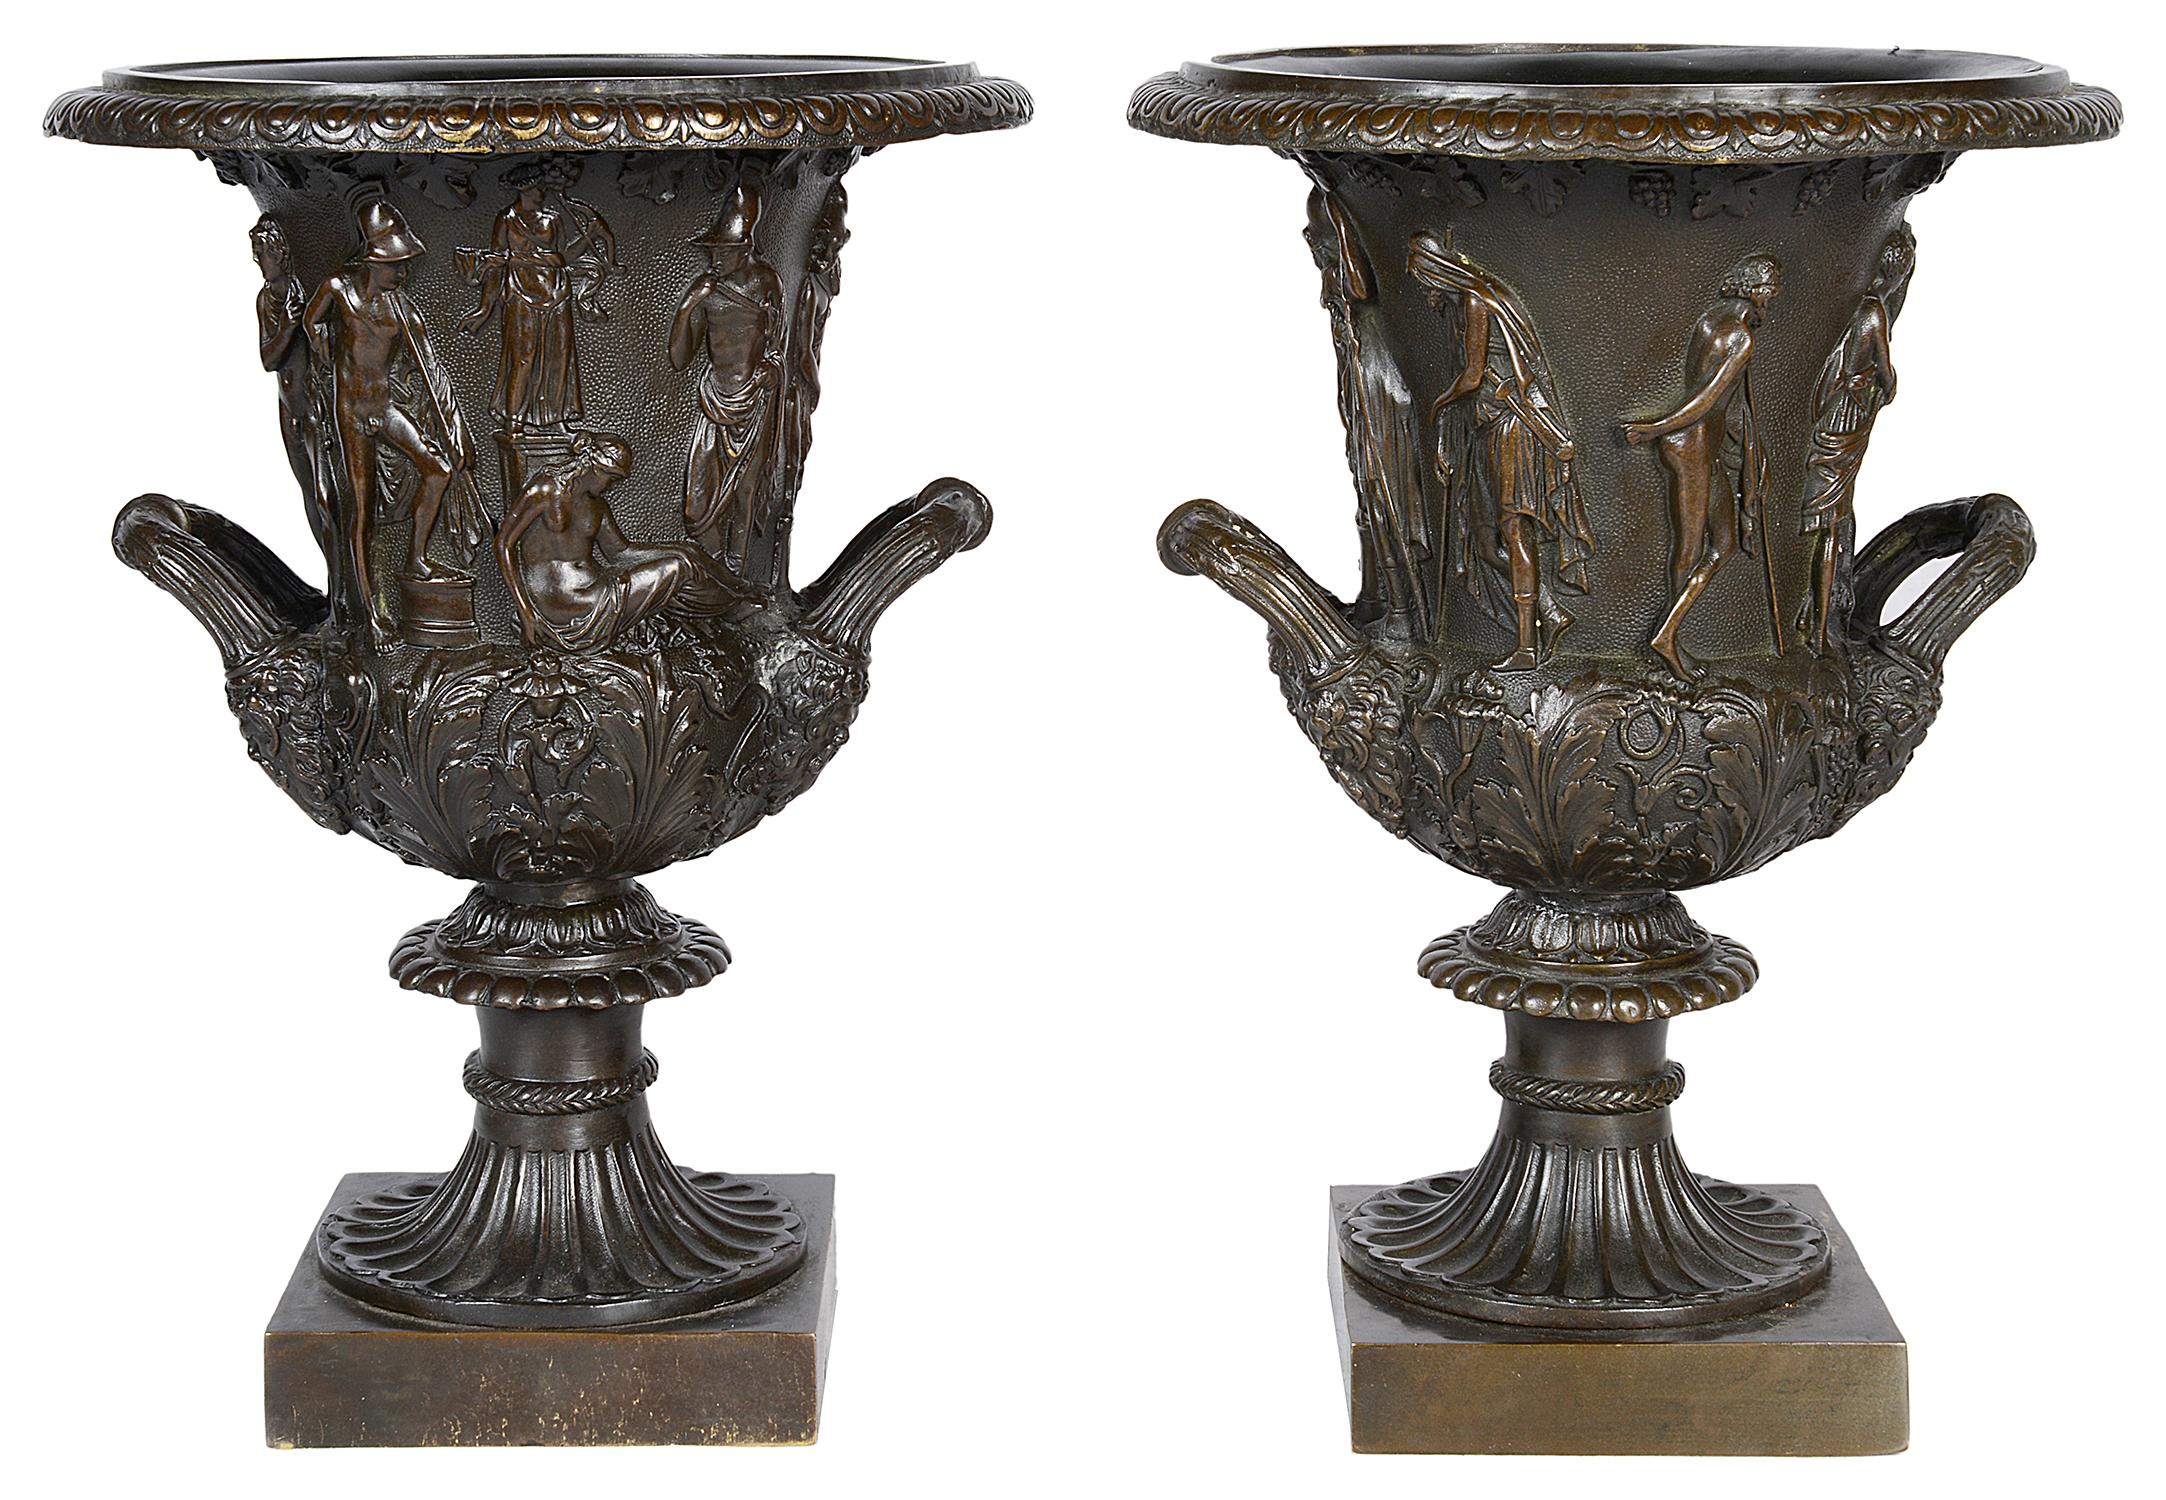 A good quality pair of 19th century style bronze urns after the Medici and Borghese models, with good patination.